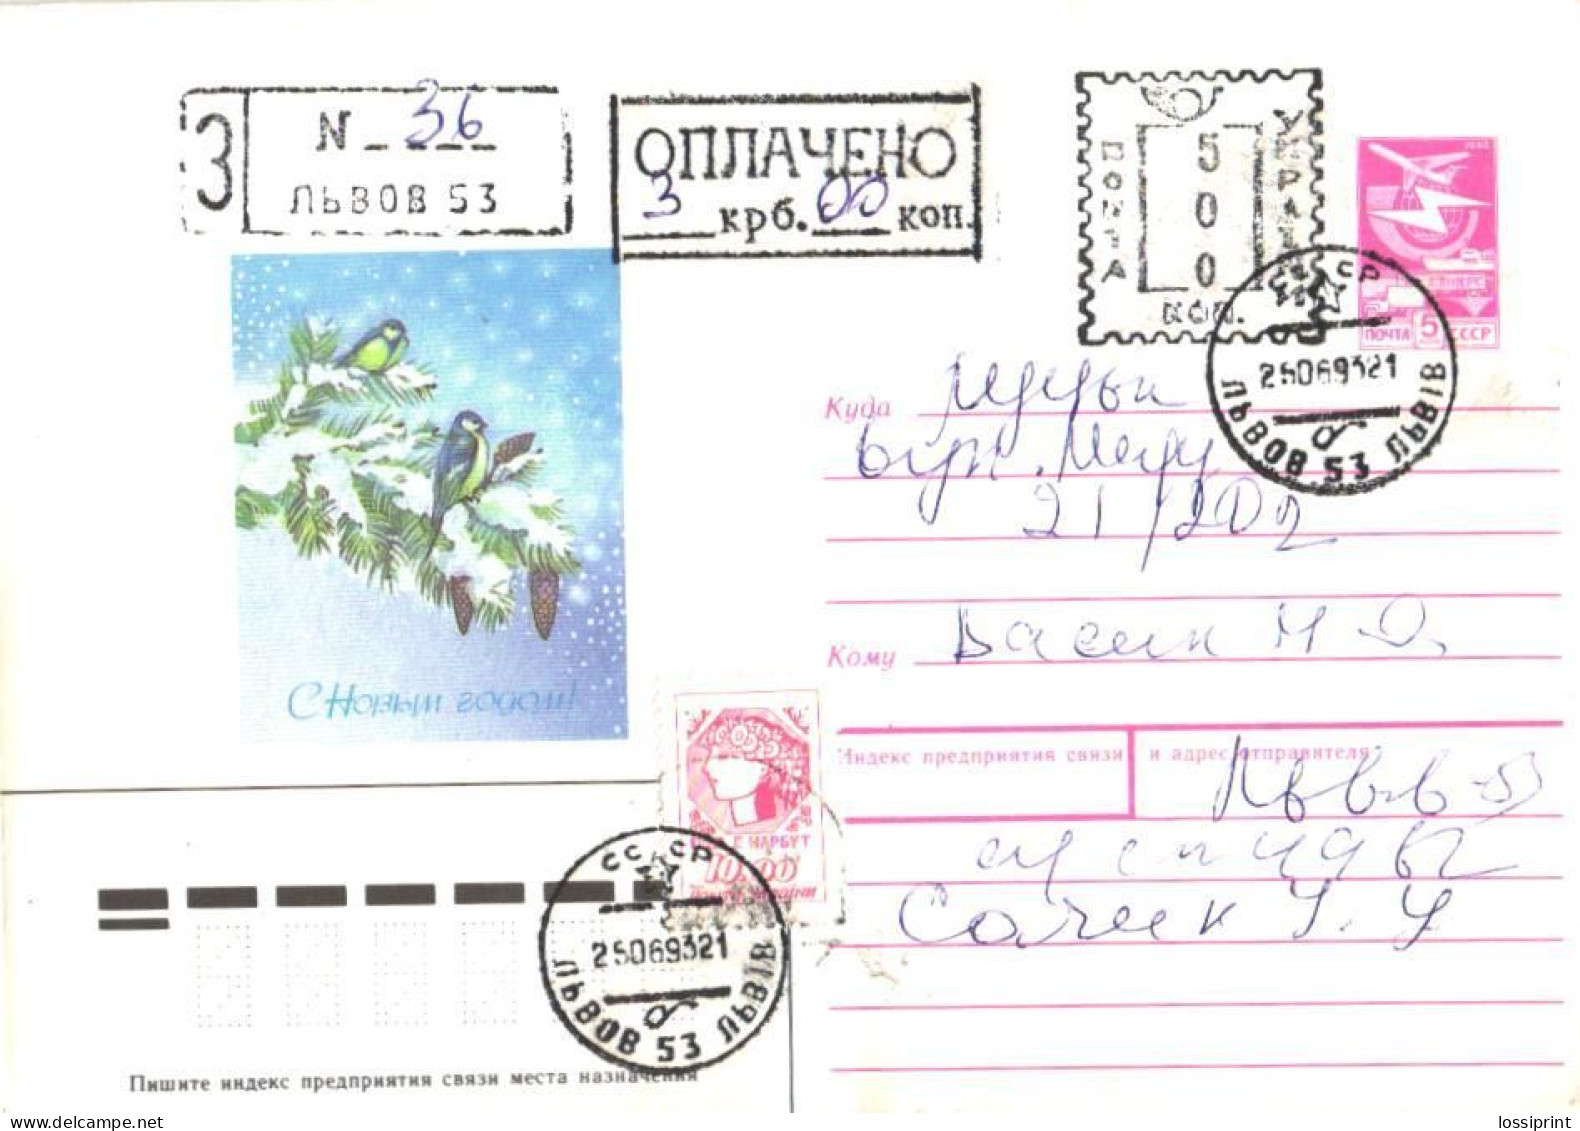 Ukraine:Ukraina:Registered Letter From Lvov 53 With Stamps And Surcharge Cancellation And Stamp, 1993 - Ukraine